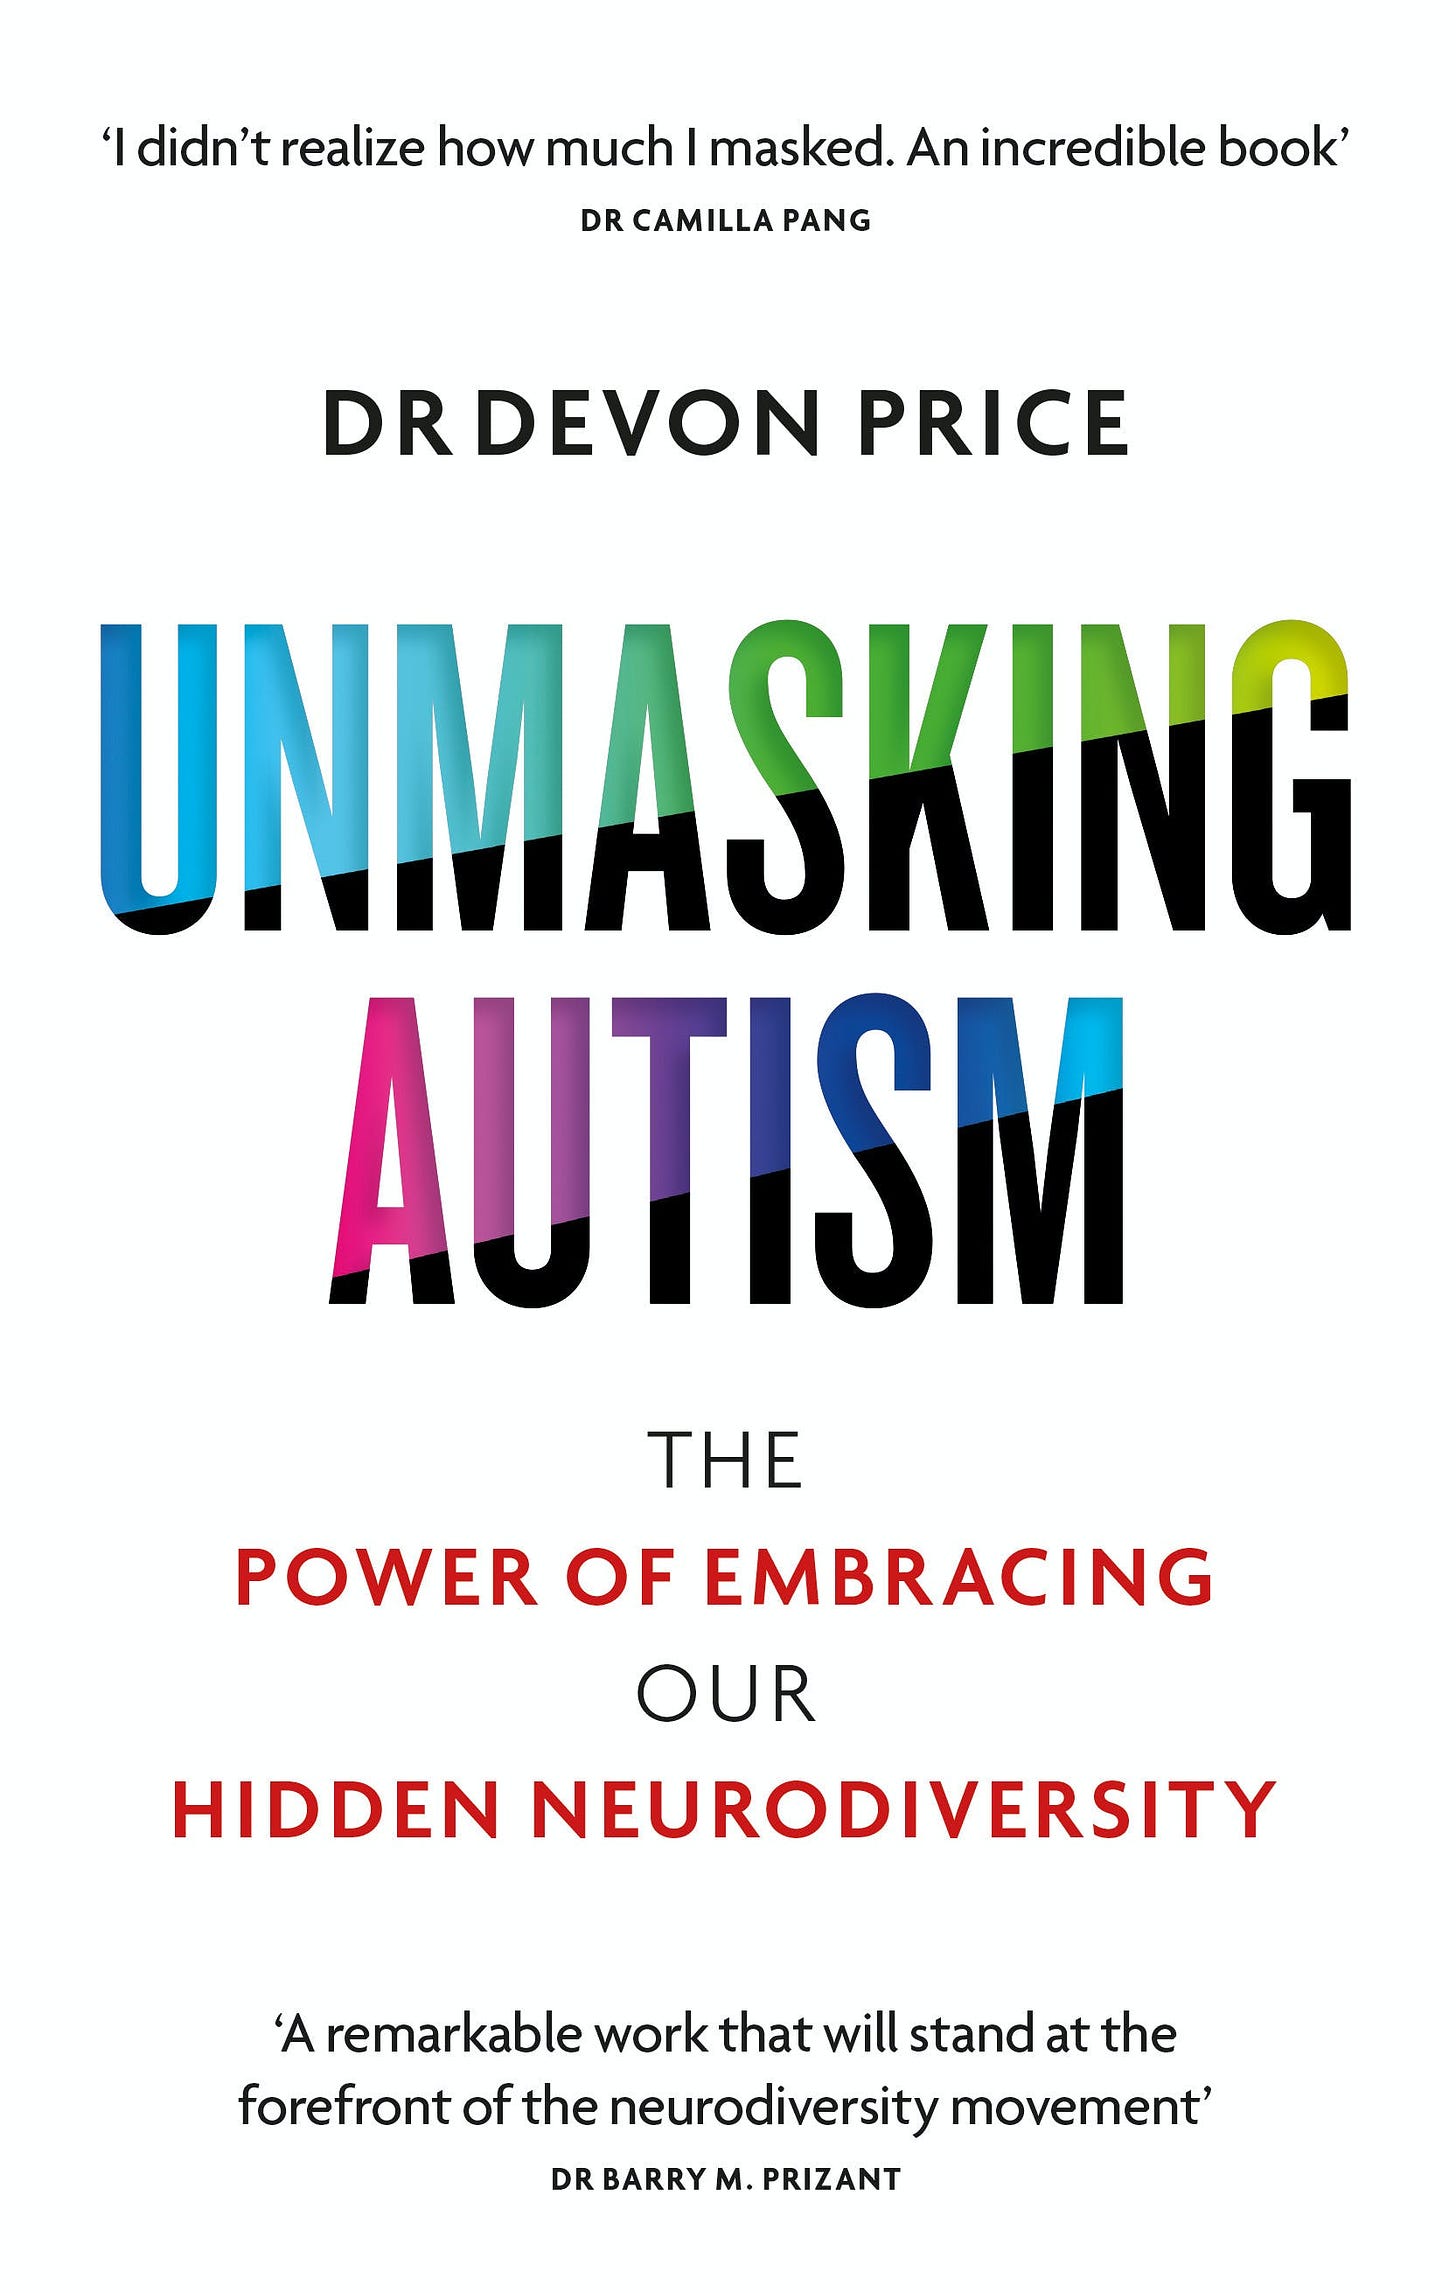 Cover of Unmasking Autism: The power of embracing our hidden neurodiversity by Devon Price